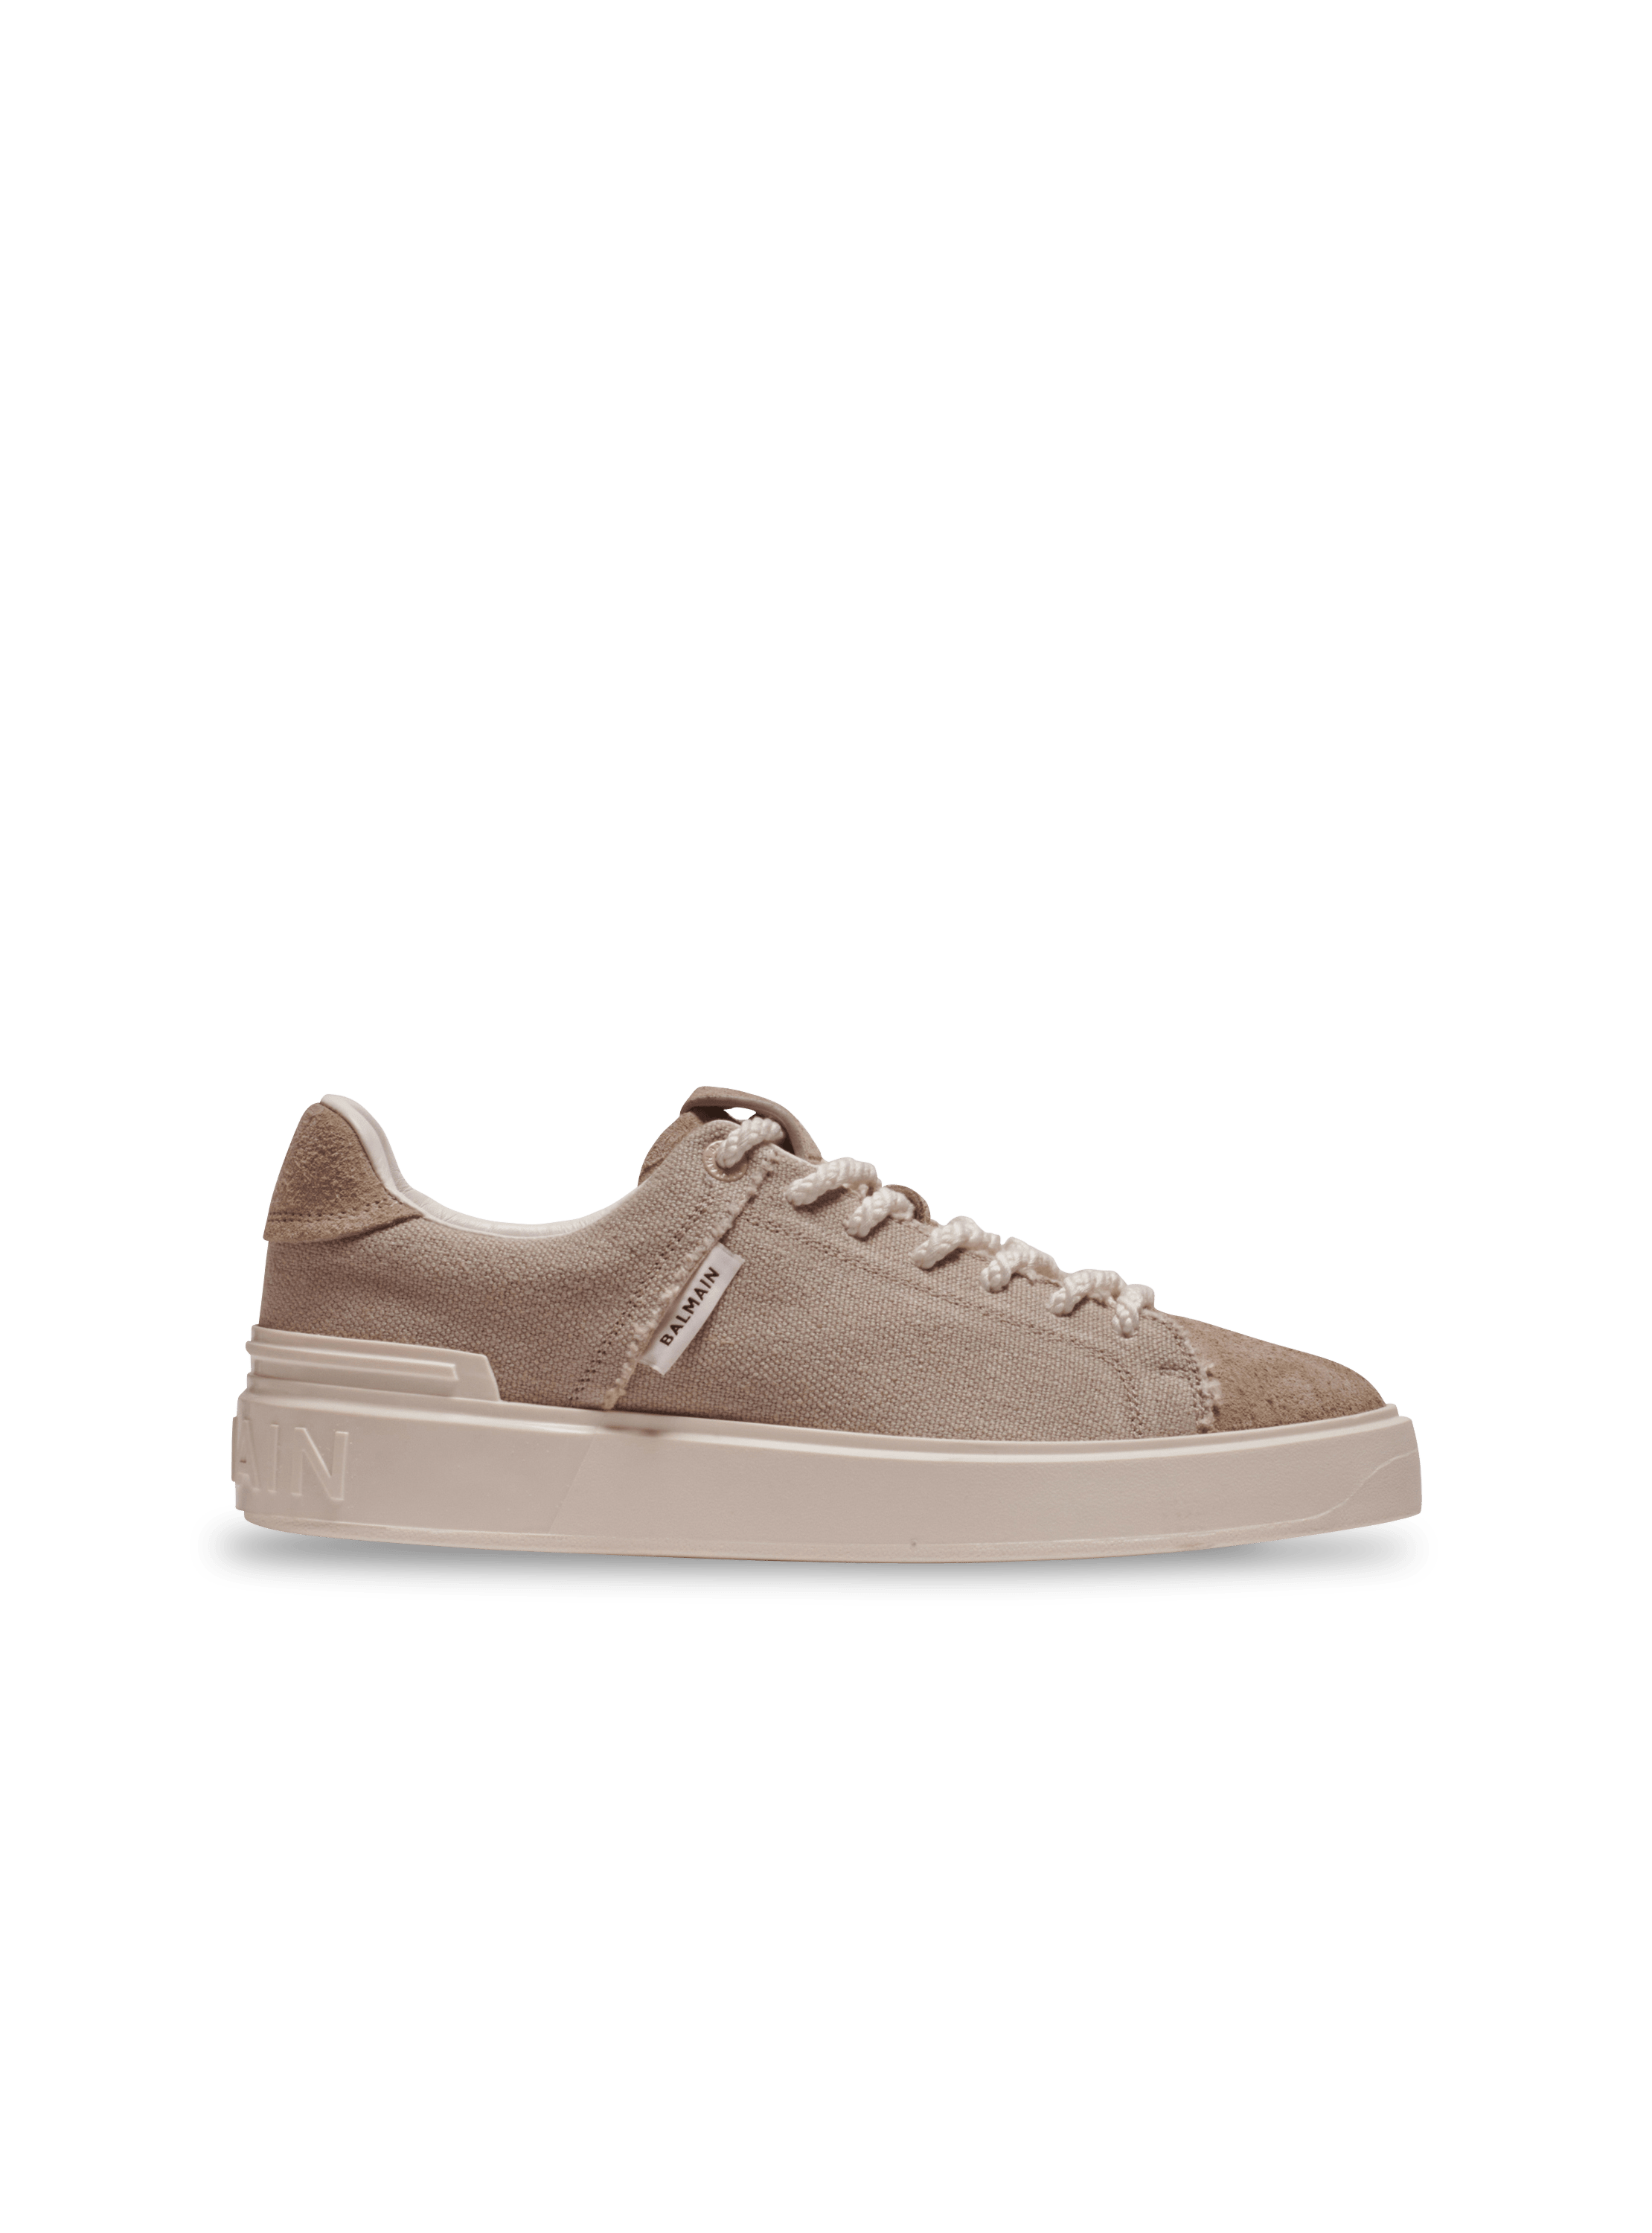 B-Court leather trainers, beige, hi-res